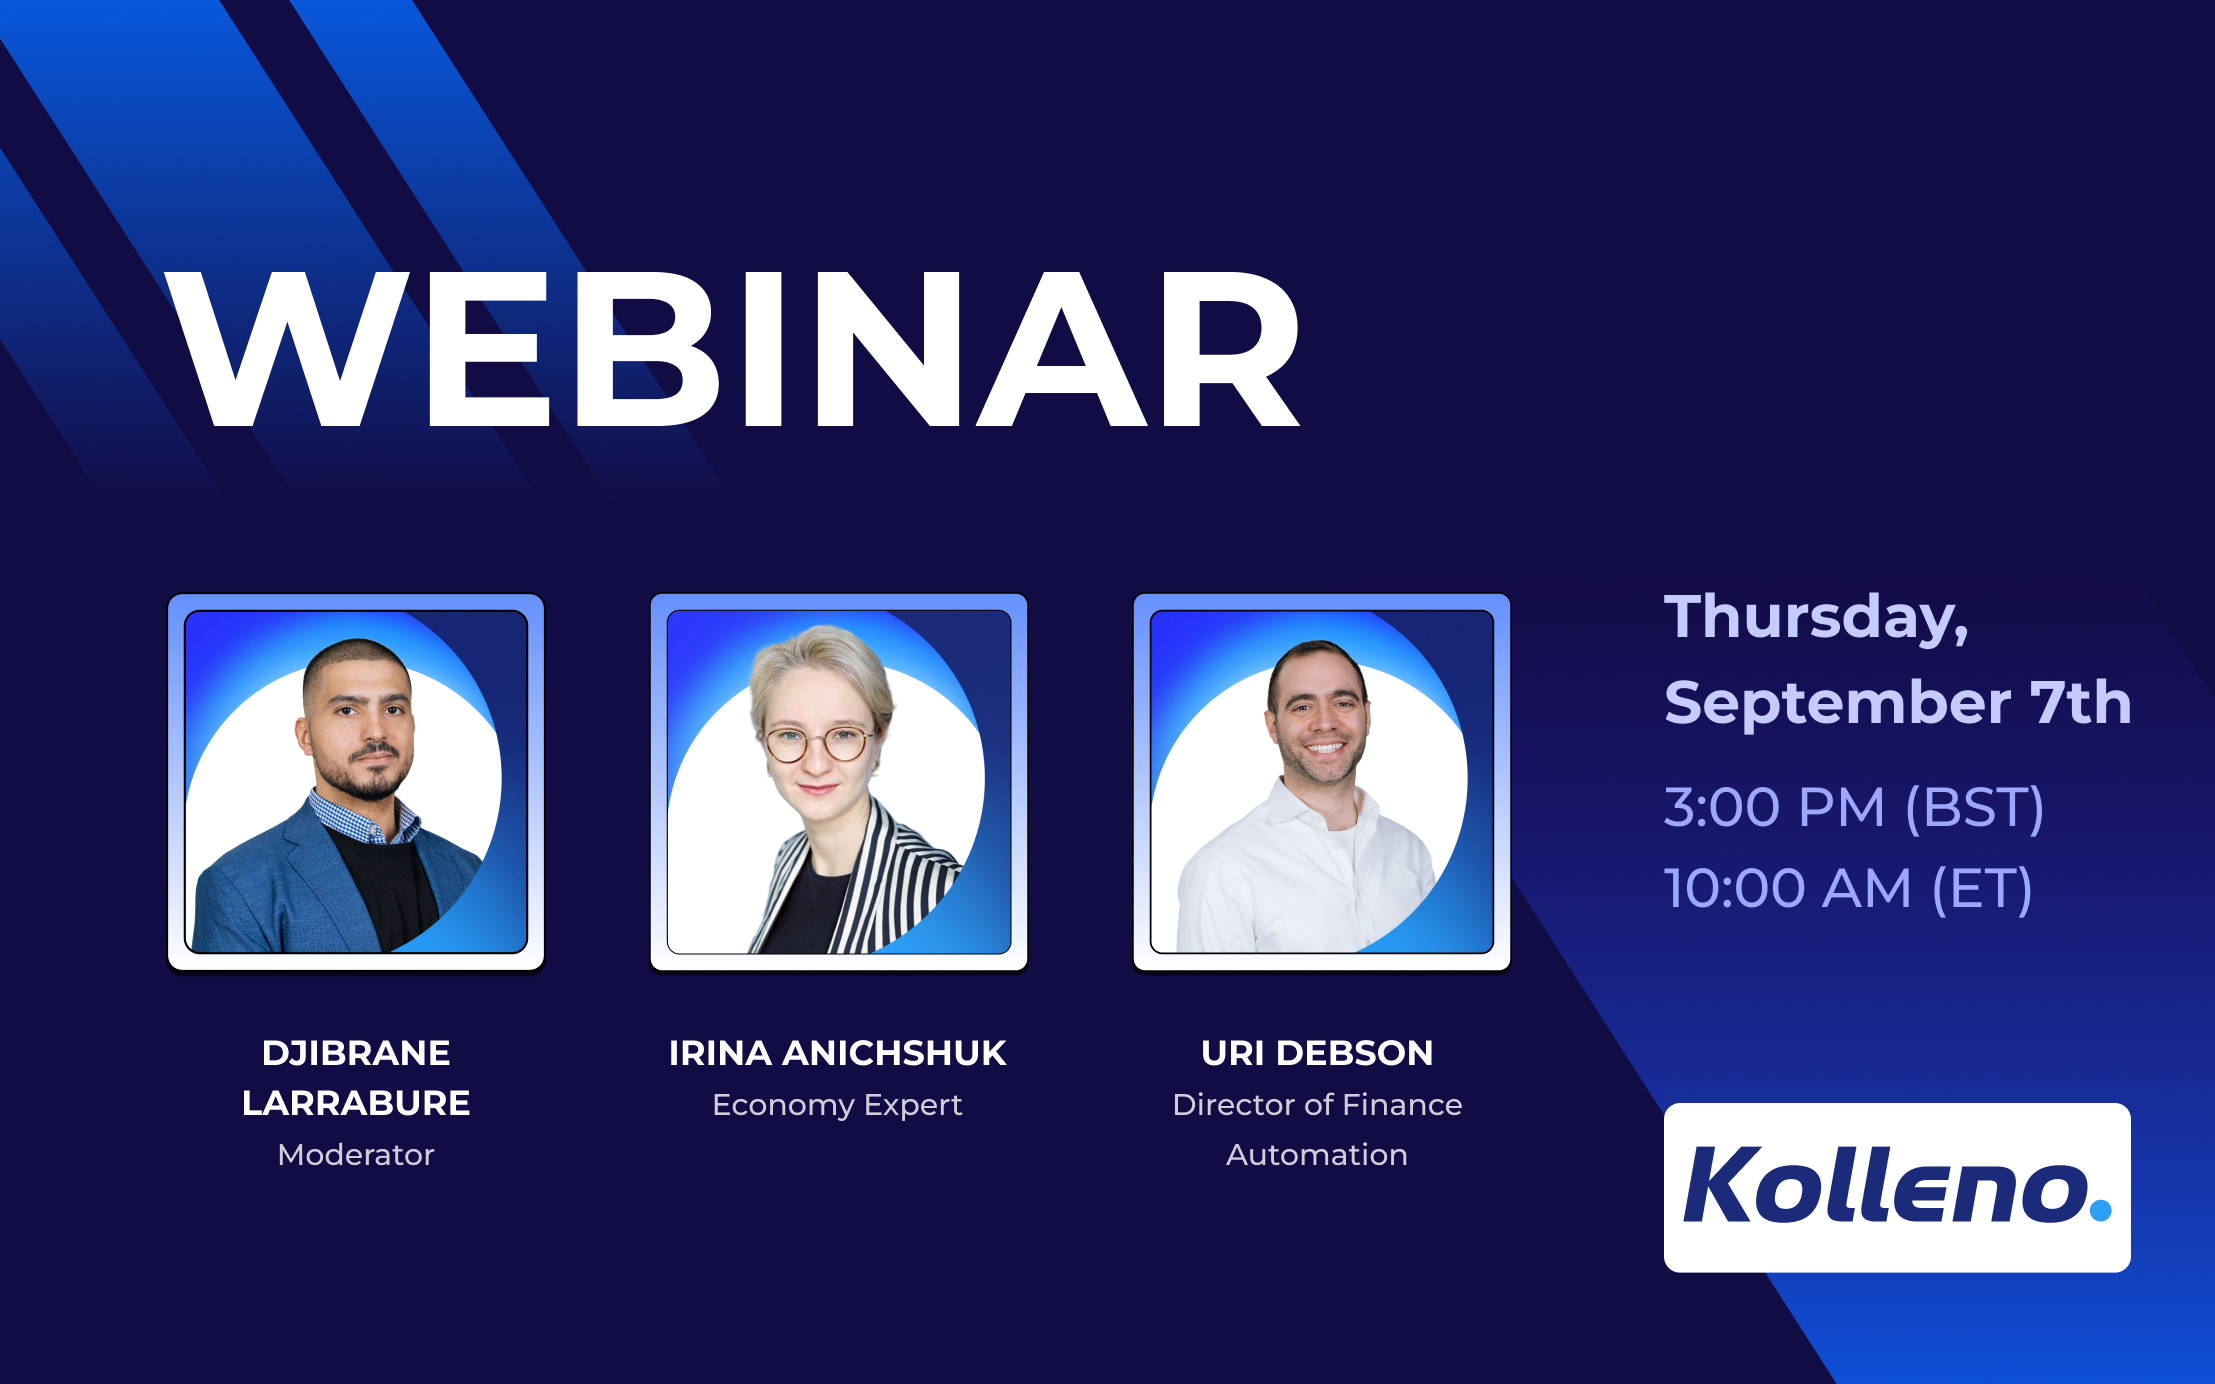 Join our webinar to see the solution in action